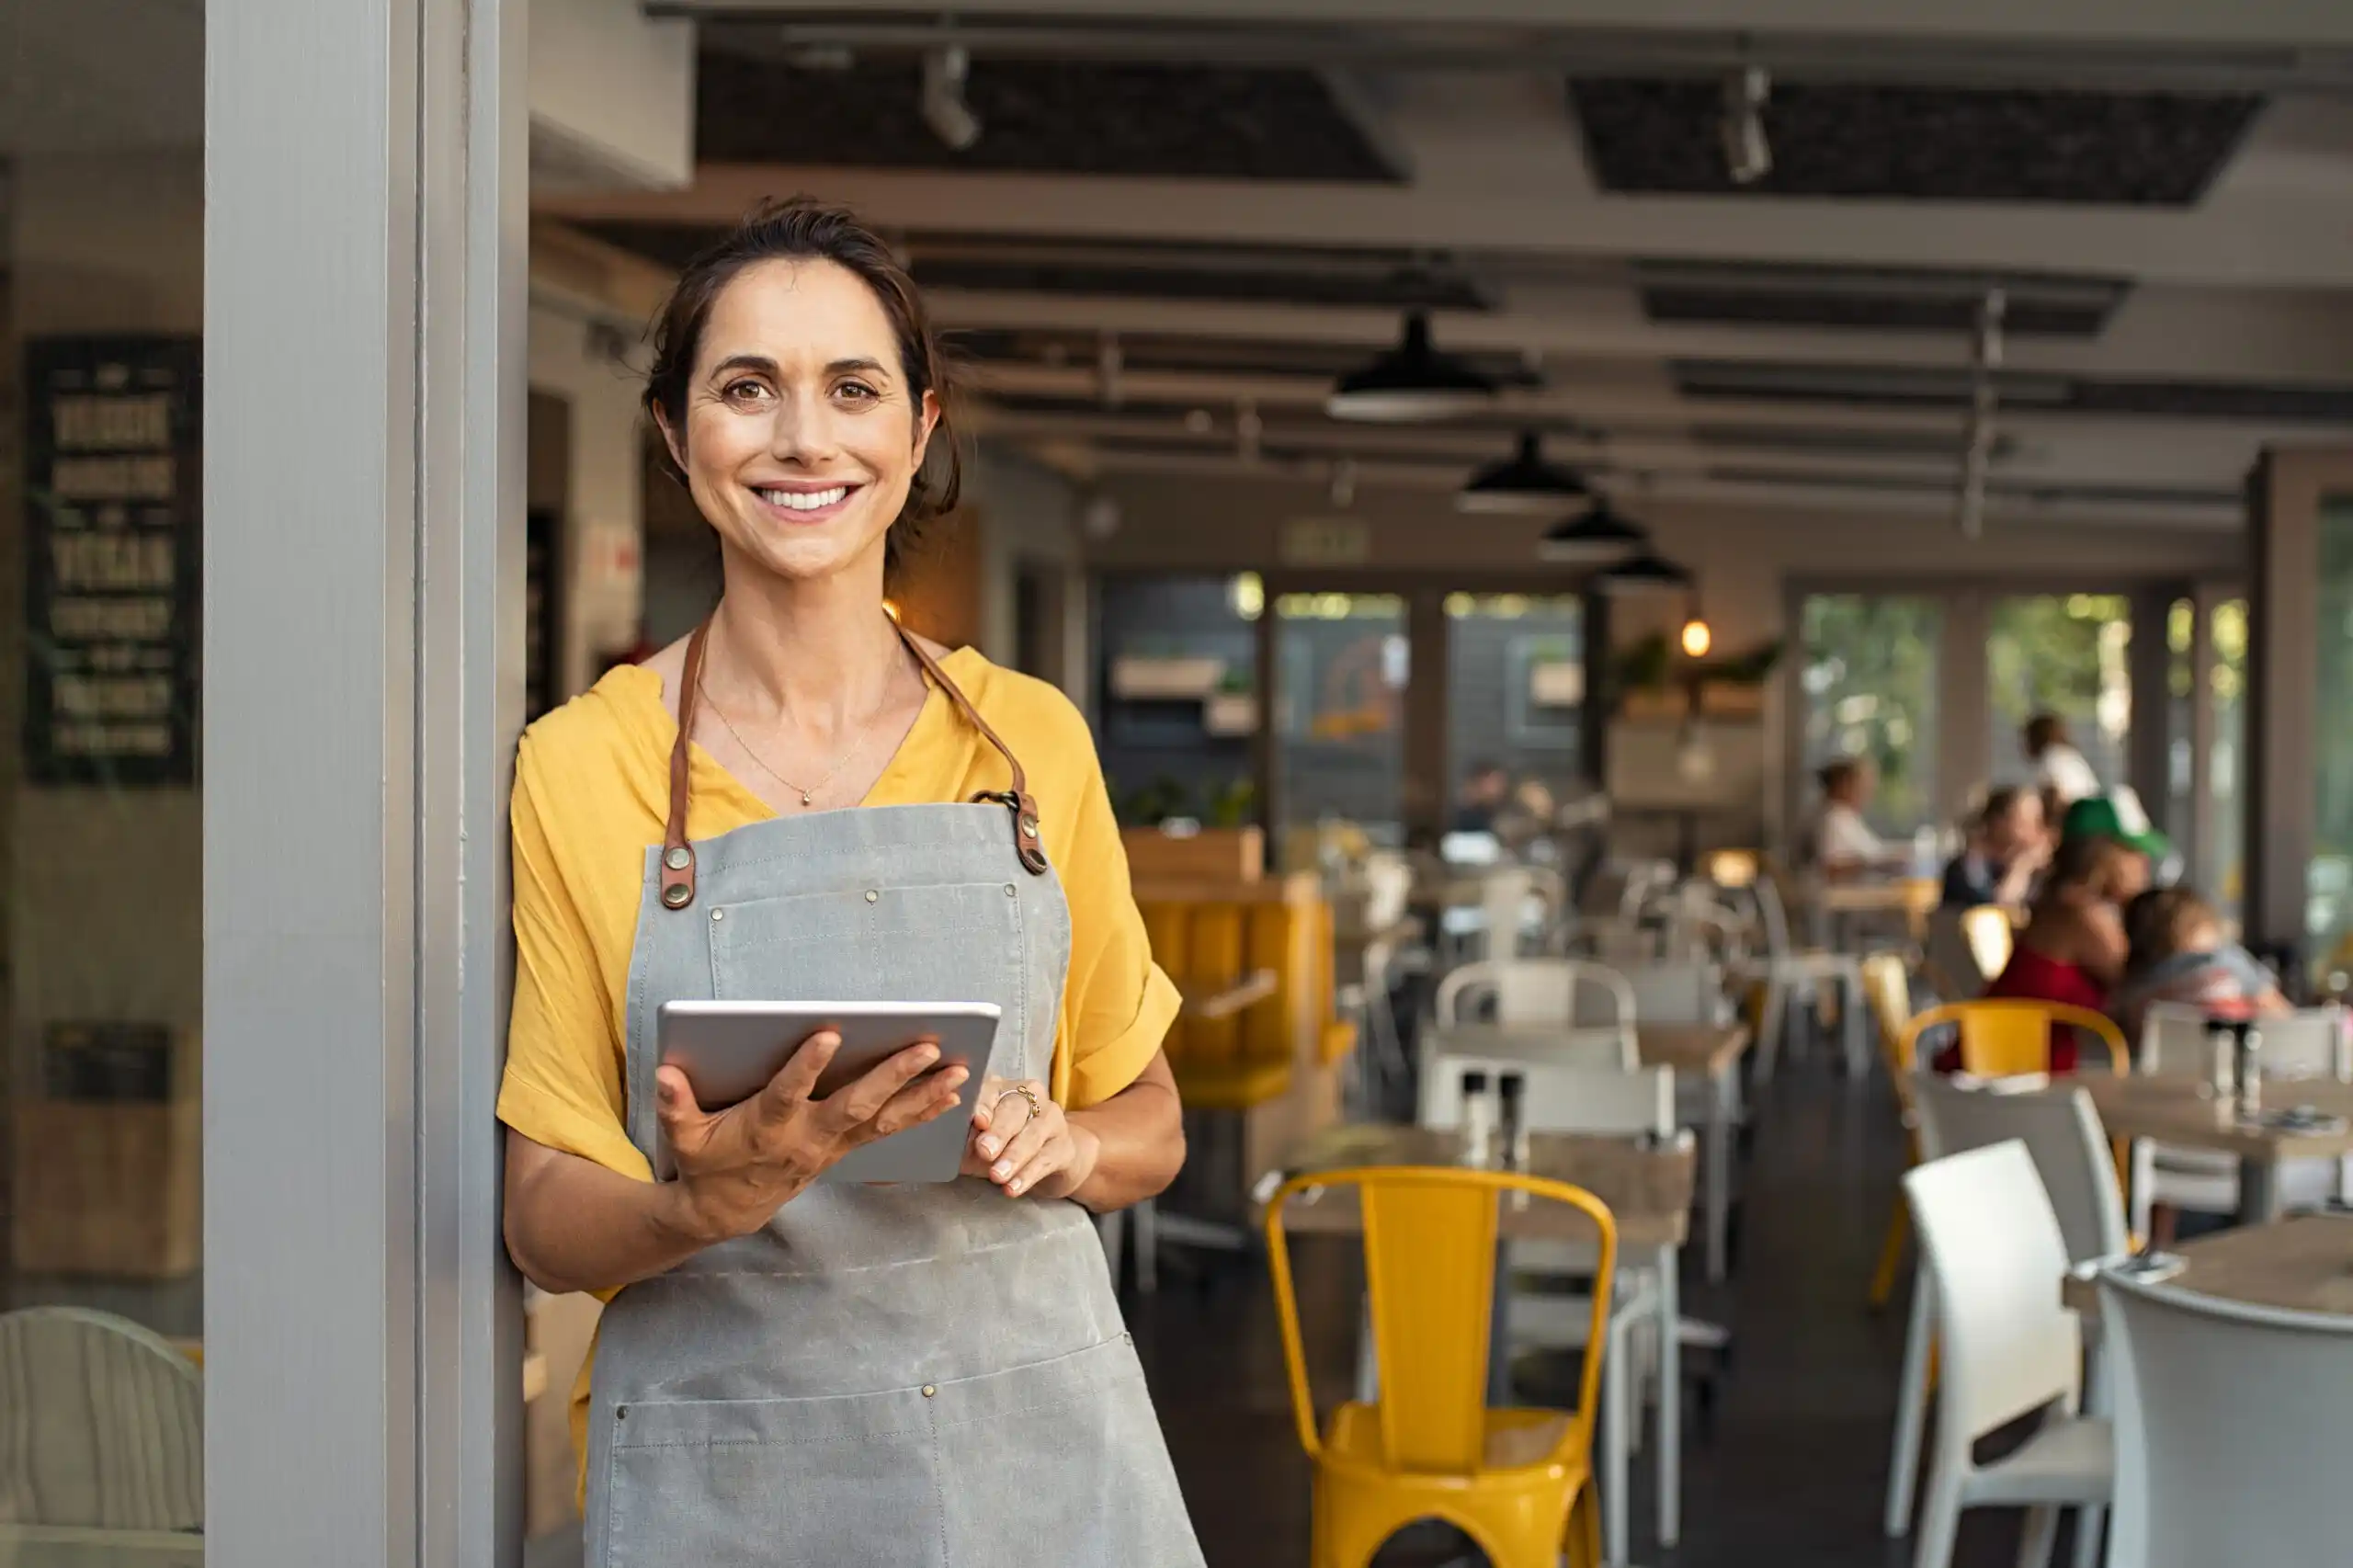 Restaurant Owner Looking at Online Business Resources on Tablet